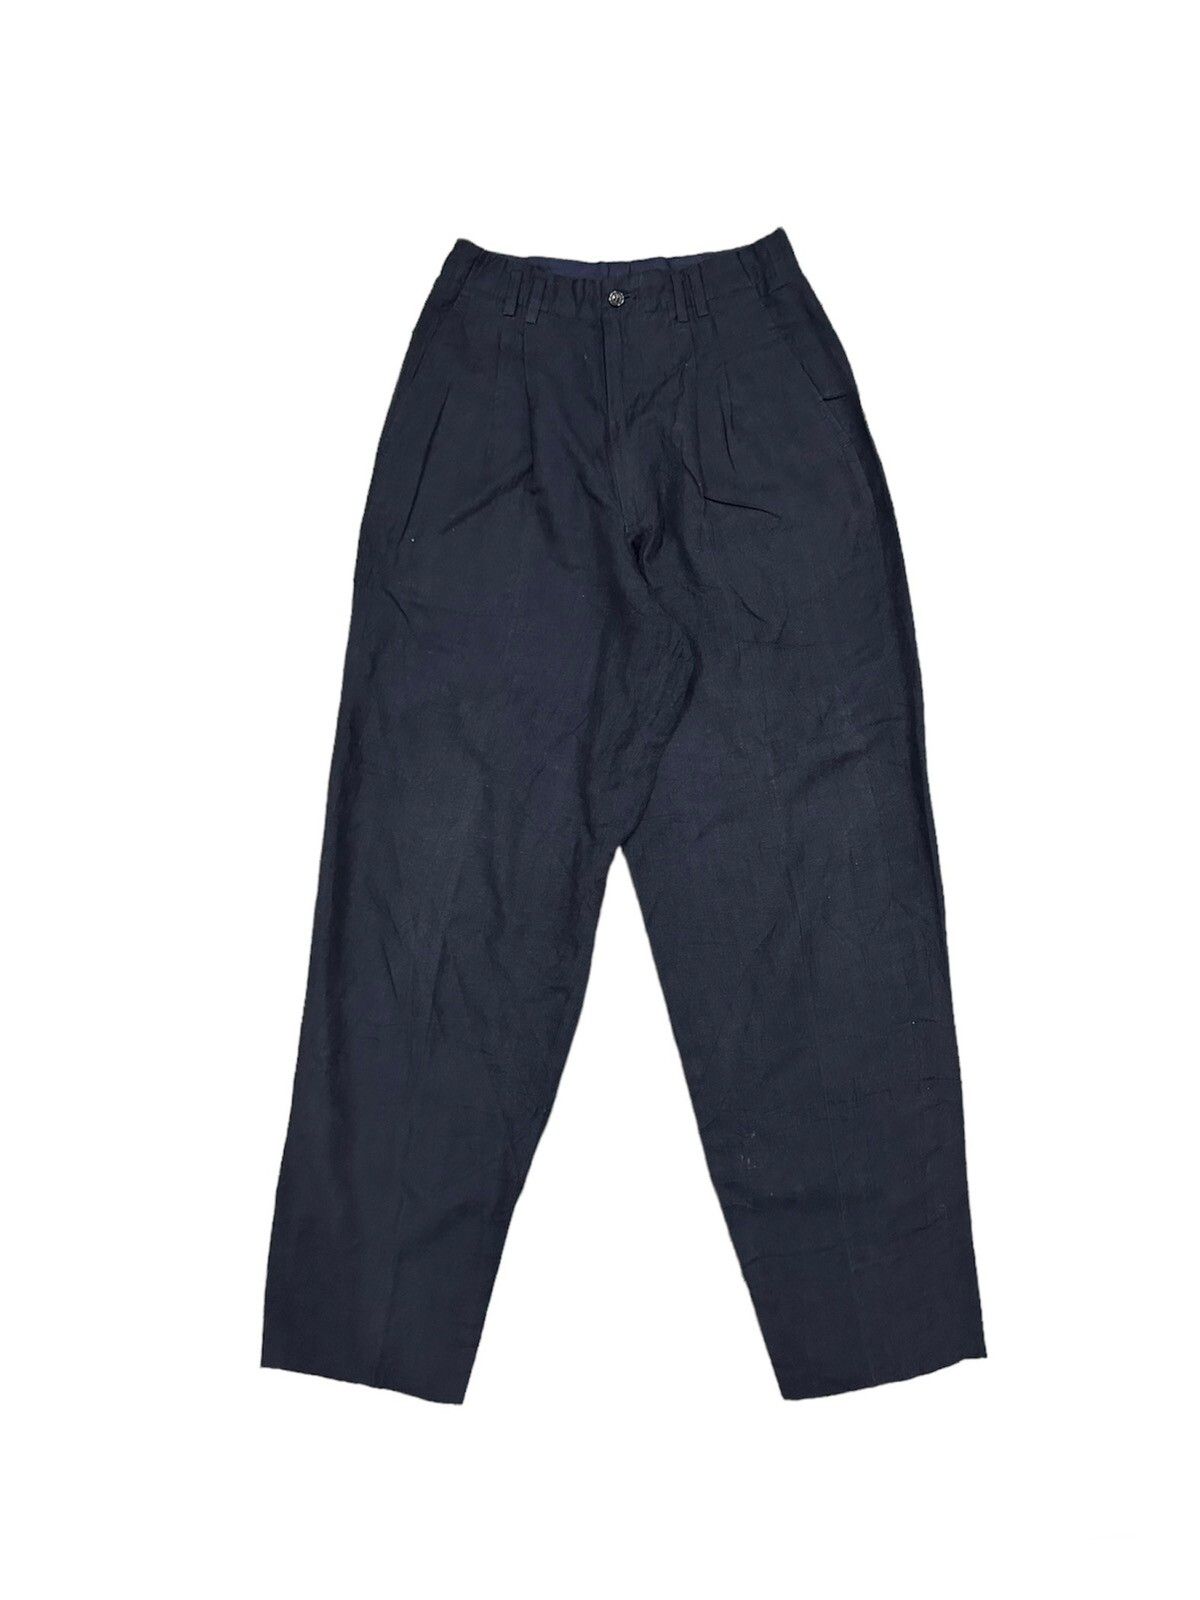 AW1992 Comme Des Garcons Homme Casual Trousers - 1